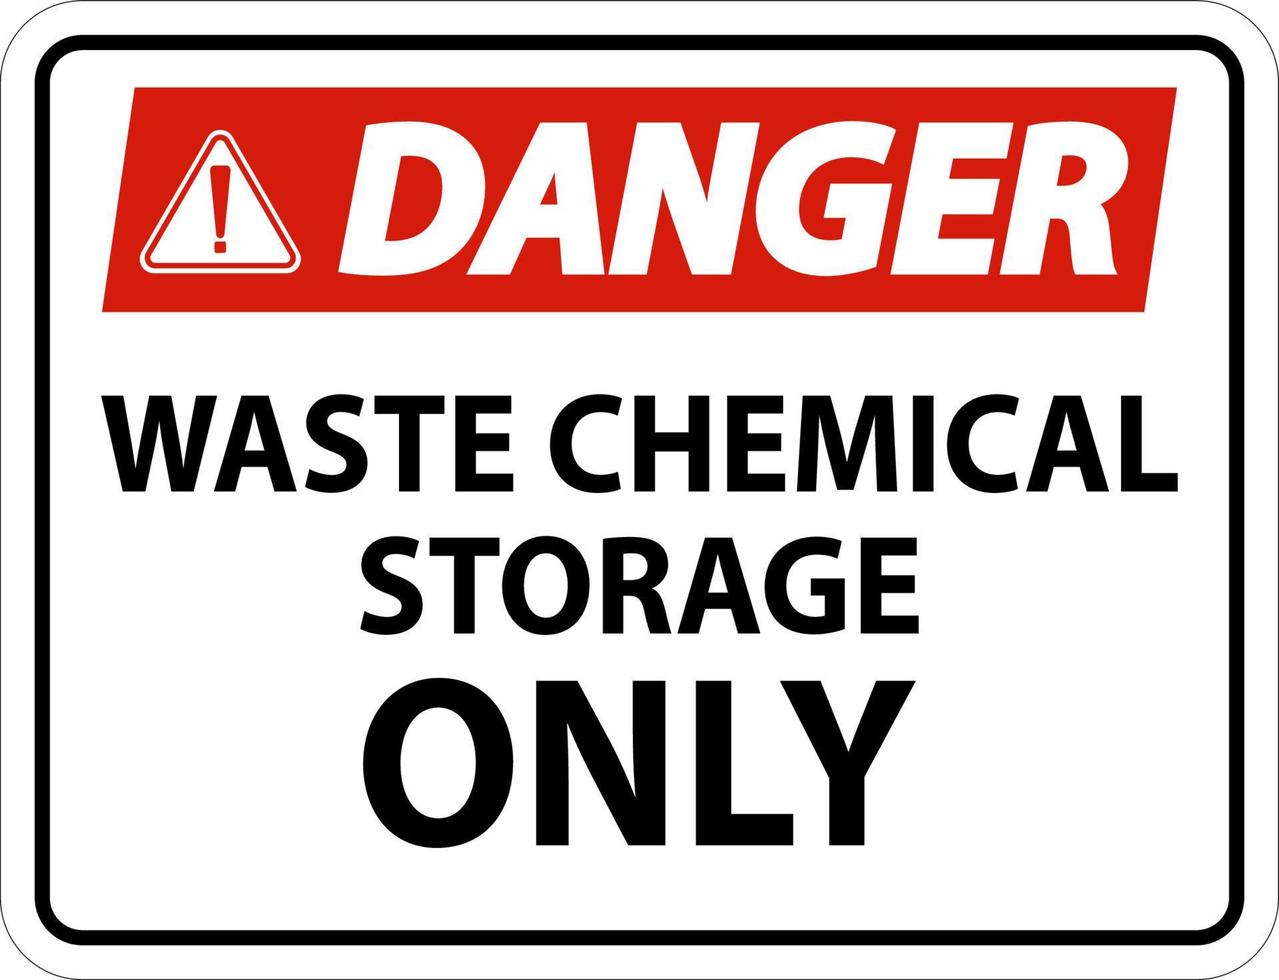 Danger Waste Chemical Storage Only On White Background vector